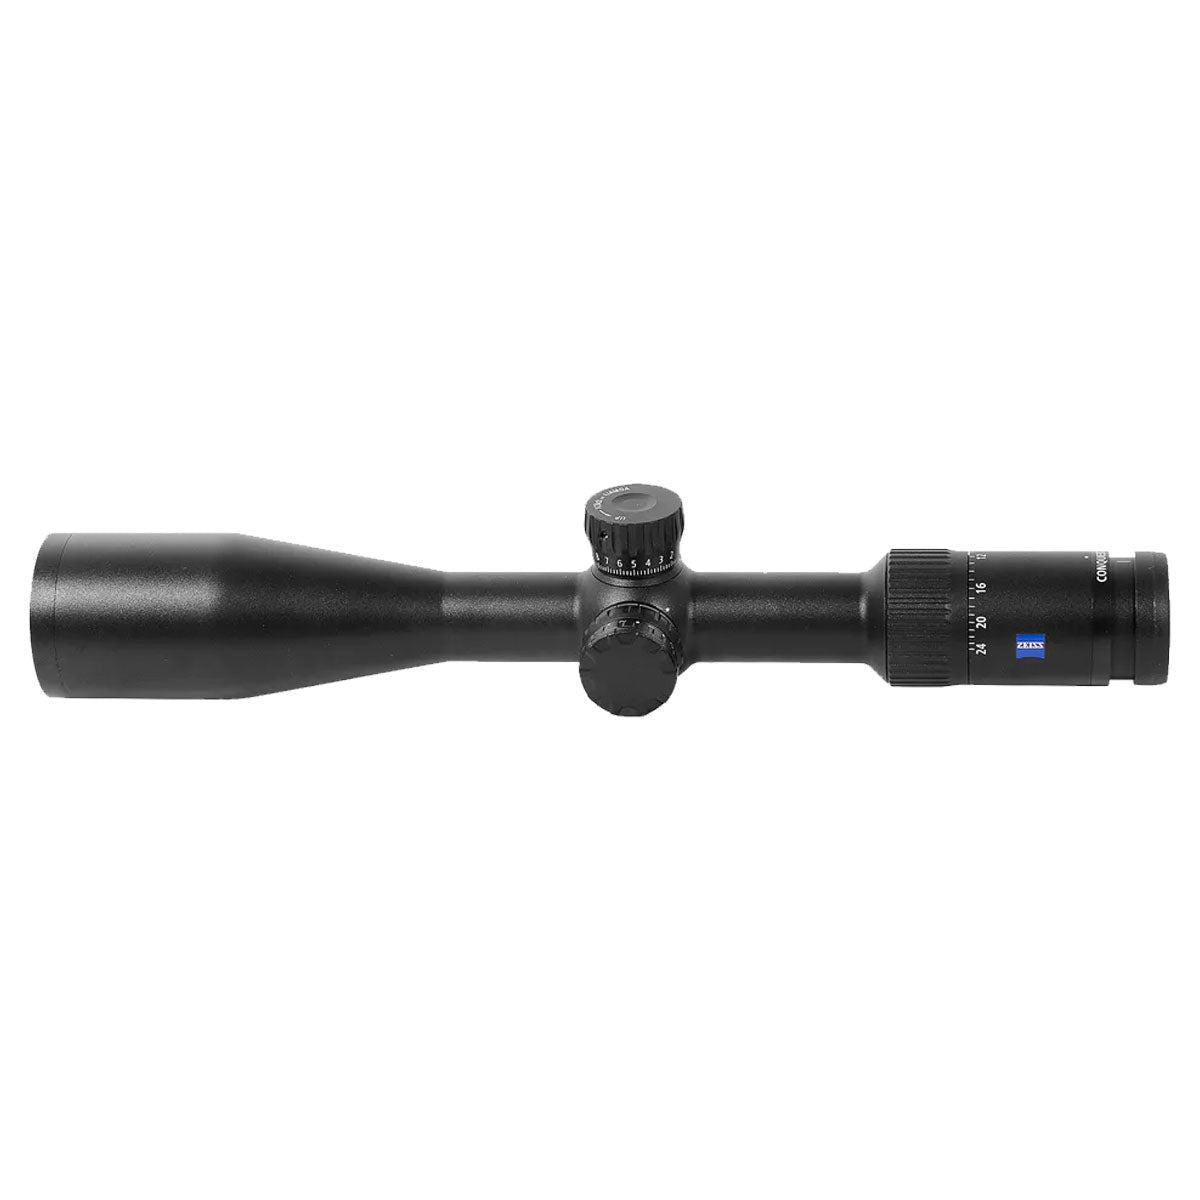 Zeiss Conquest V4 6-24x50 with ZBi Illuminated #68 Reticle Ext. Locking Wind Riflescope